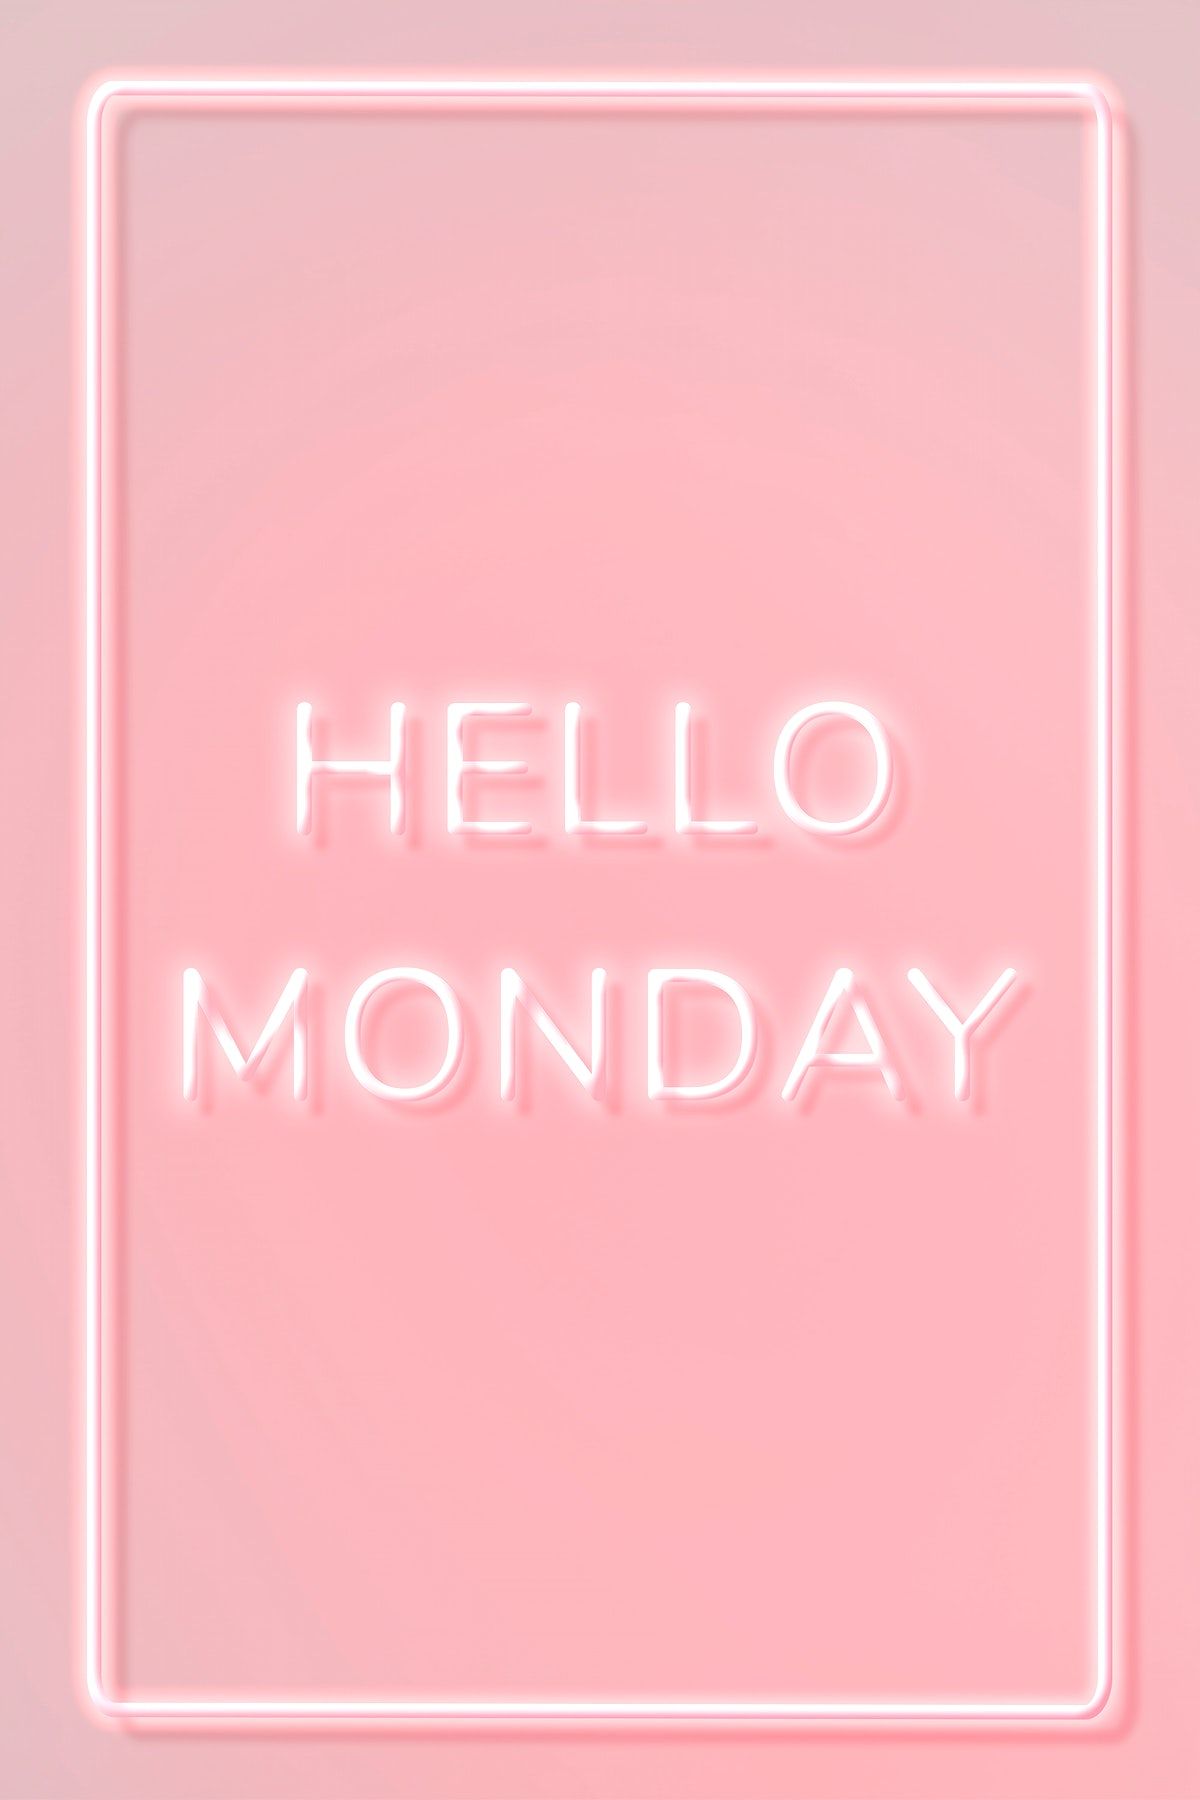 Download free image of Neon frame Hello Monday border text by Hein about monday,